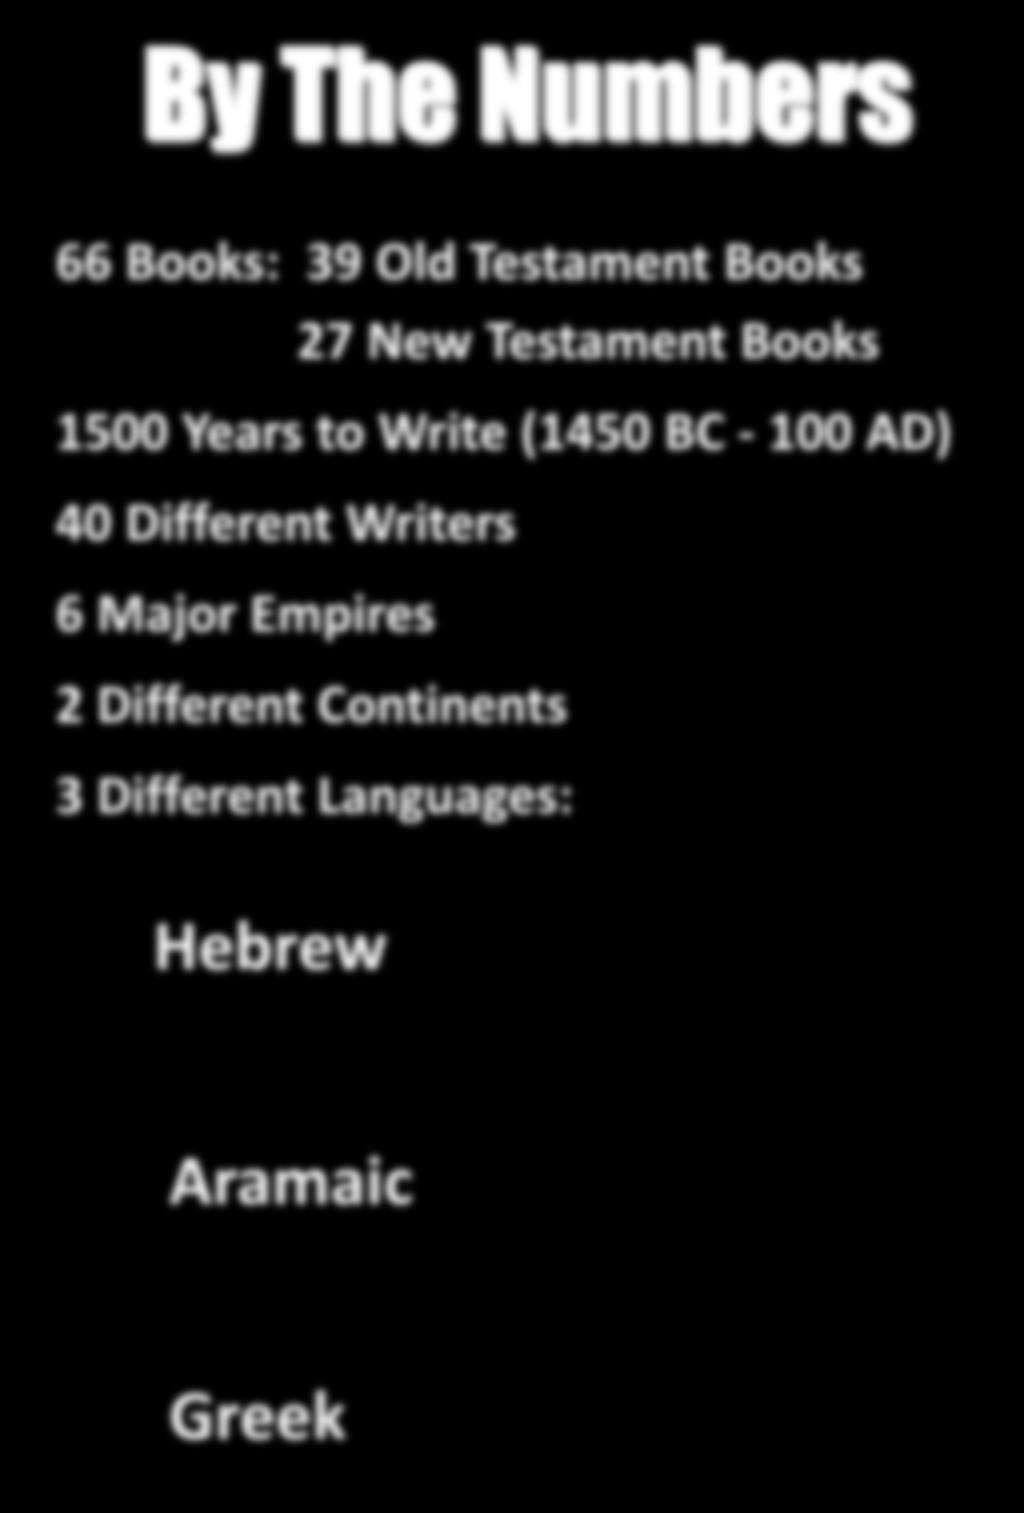 100 AD) 40 Different Writers 6 Major Empires 2